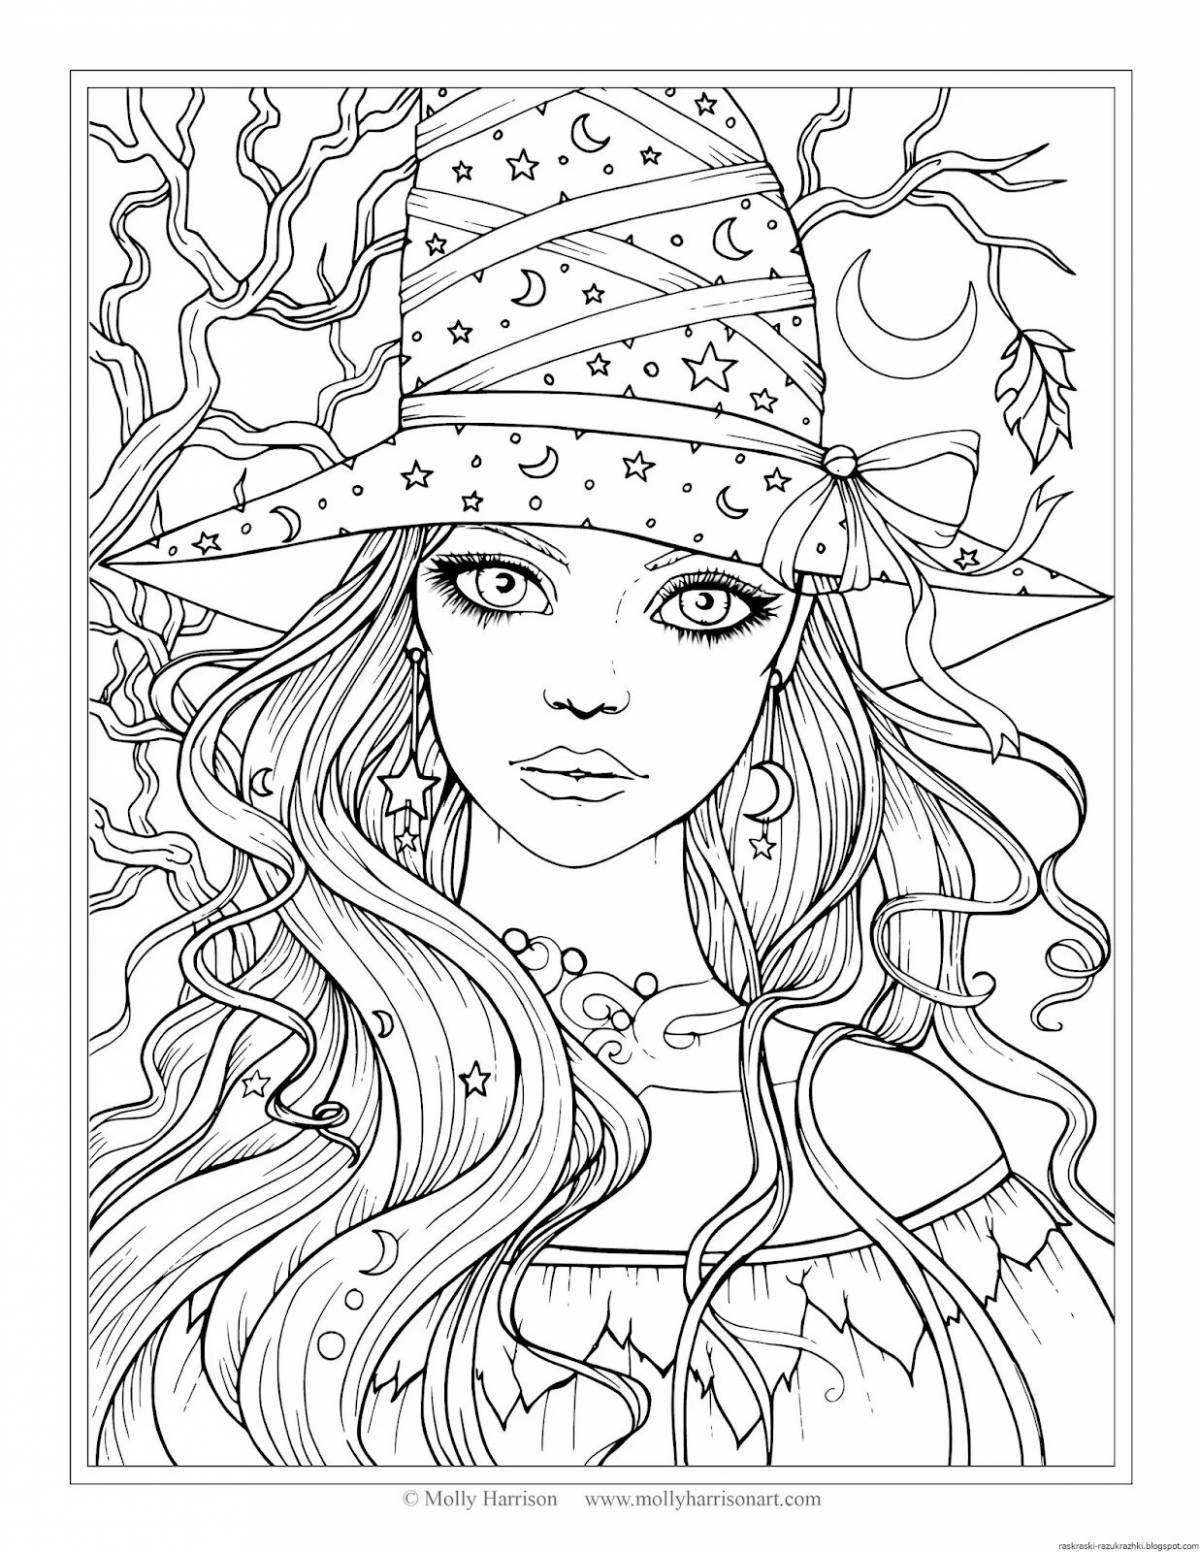 Amazing coloring book for girls 10-15 years old